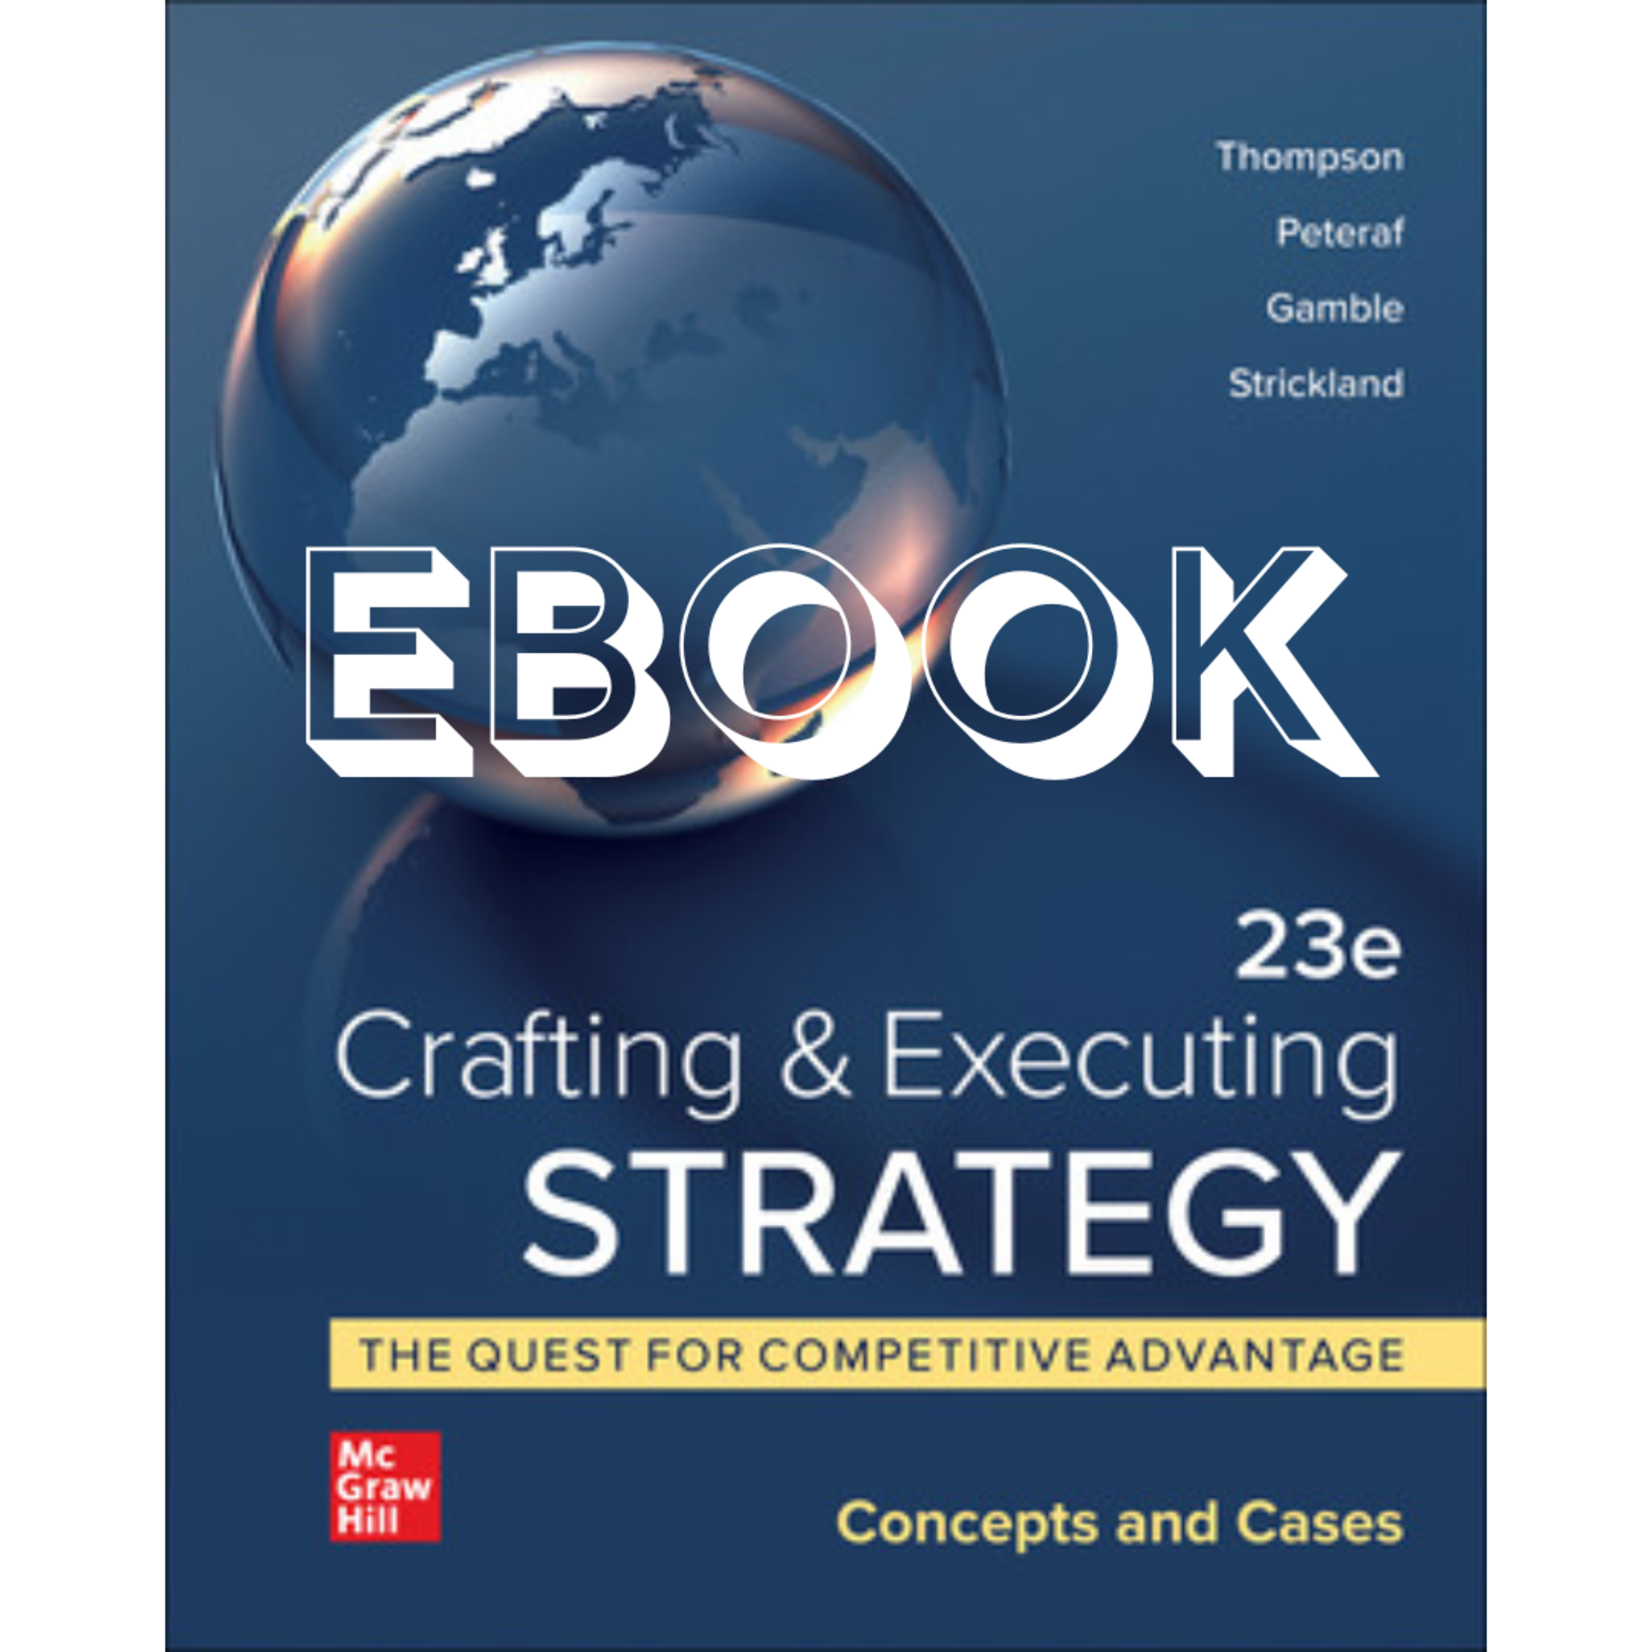 McGraw-Hill Crafting & Executing Strategy: The Quest for Competitive Advantage EBOOK + Connect